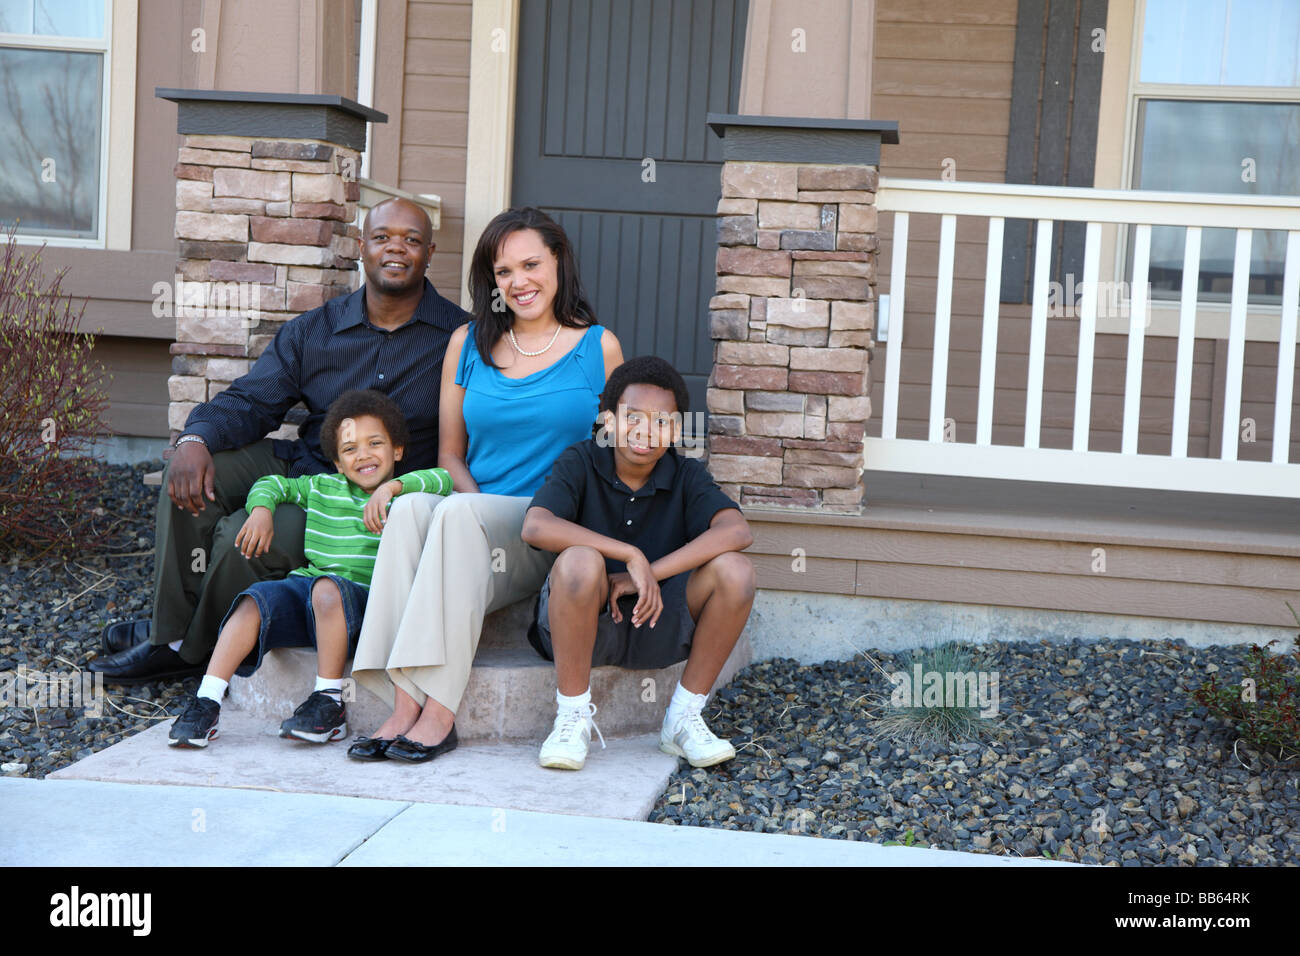 African American family sitting together on front steps of home Stock Photo